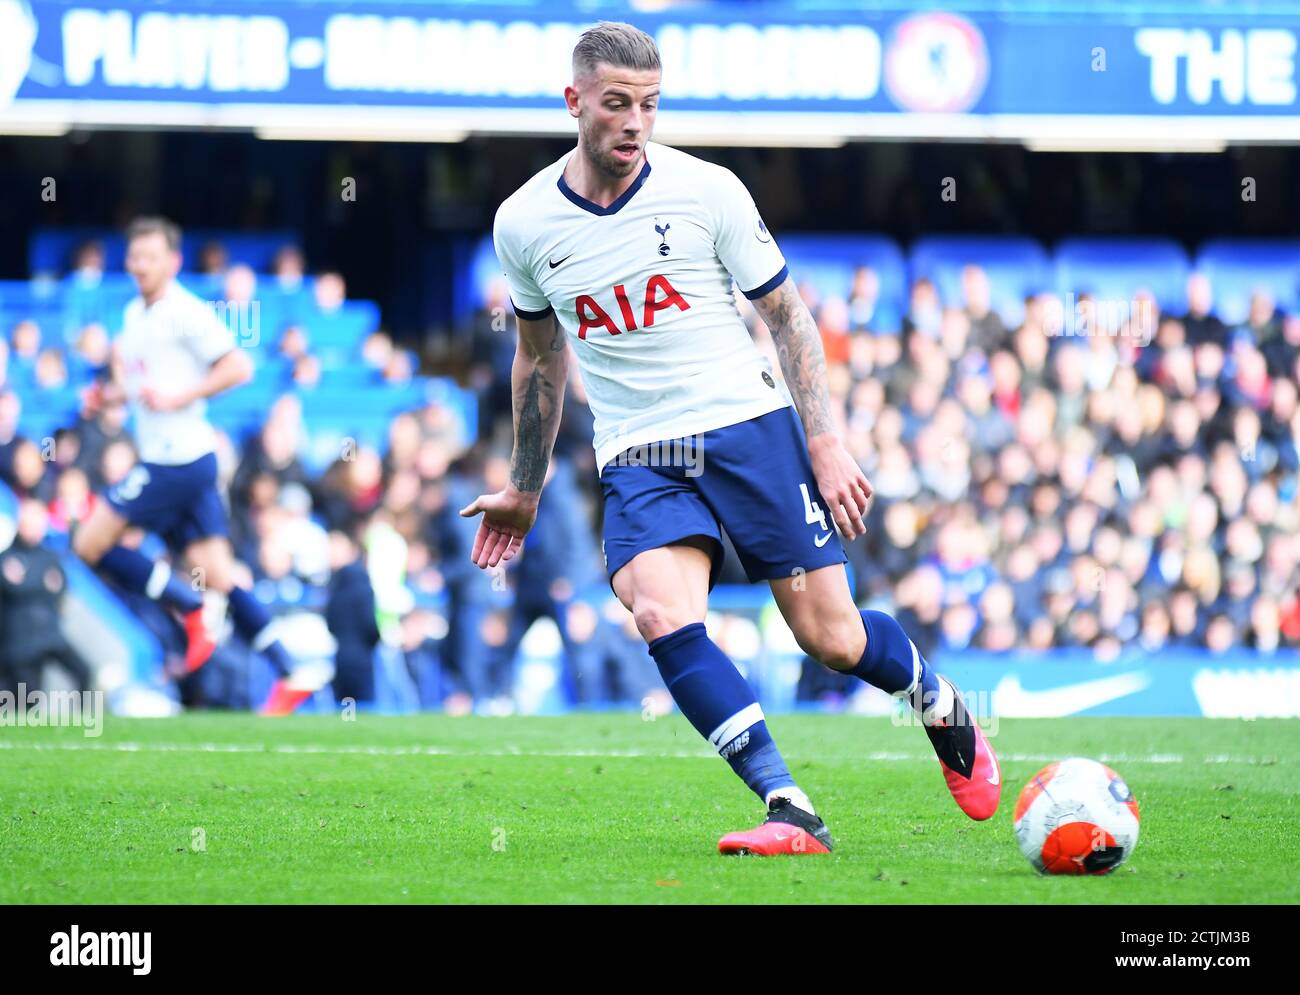 LONDON, ENGLAND - FEBRUARY 22, 2020: Toby Alderweireld of Tottenham pictured during the 2019/20 Premier League game between Chelsea FC and Tottenham Hotspur FC at Stamford Bridge. Stock Photo